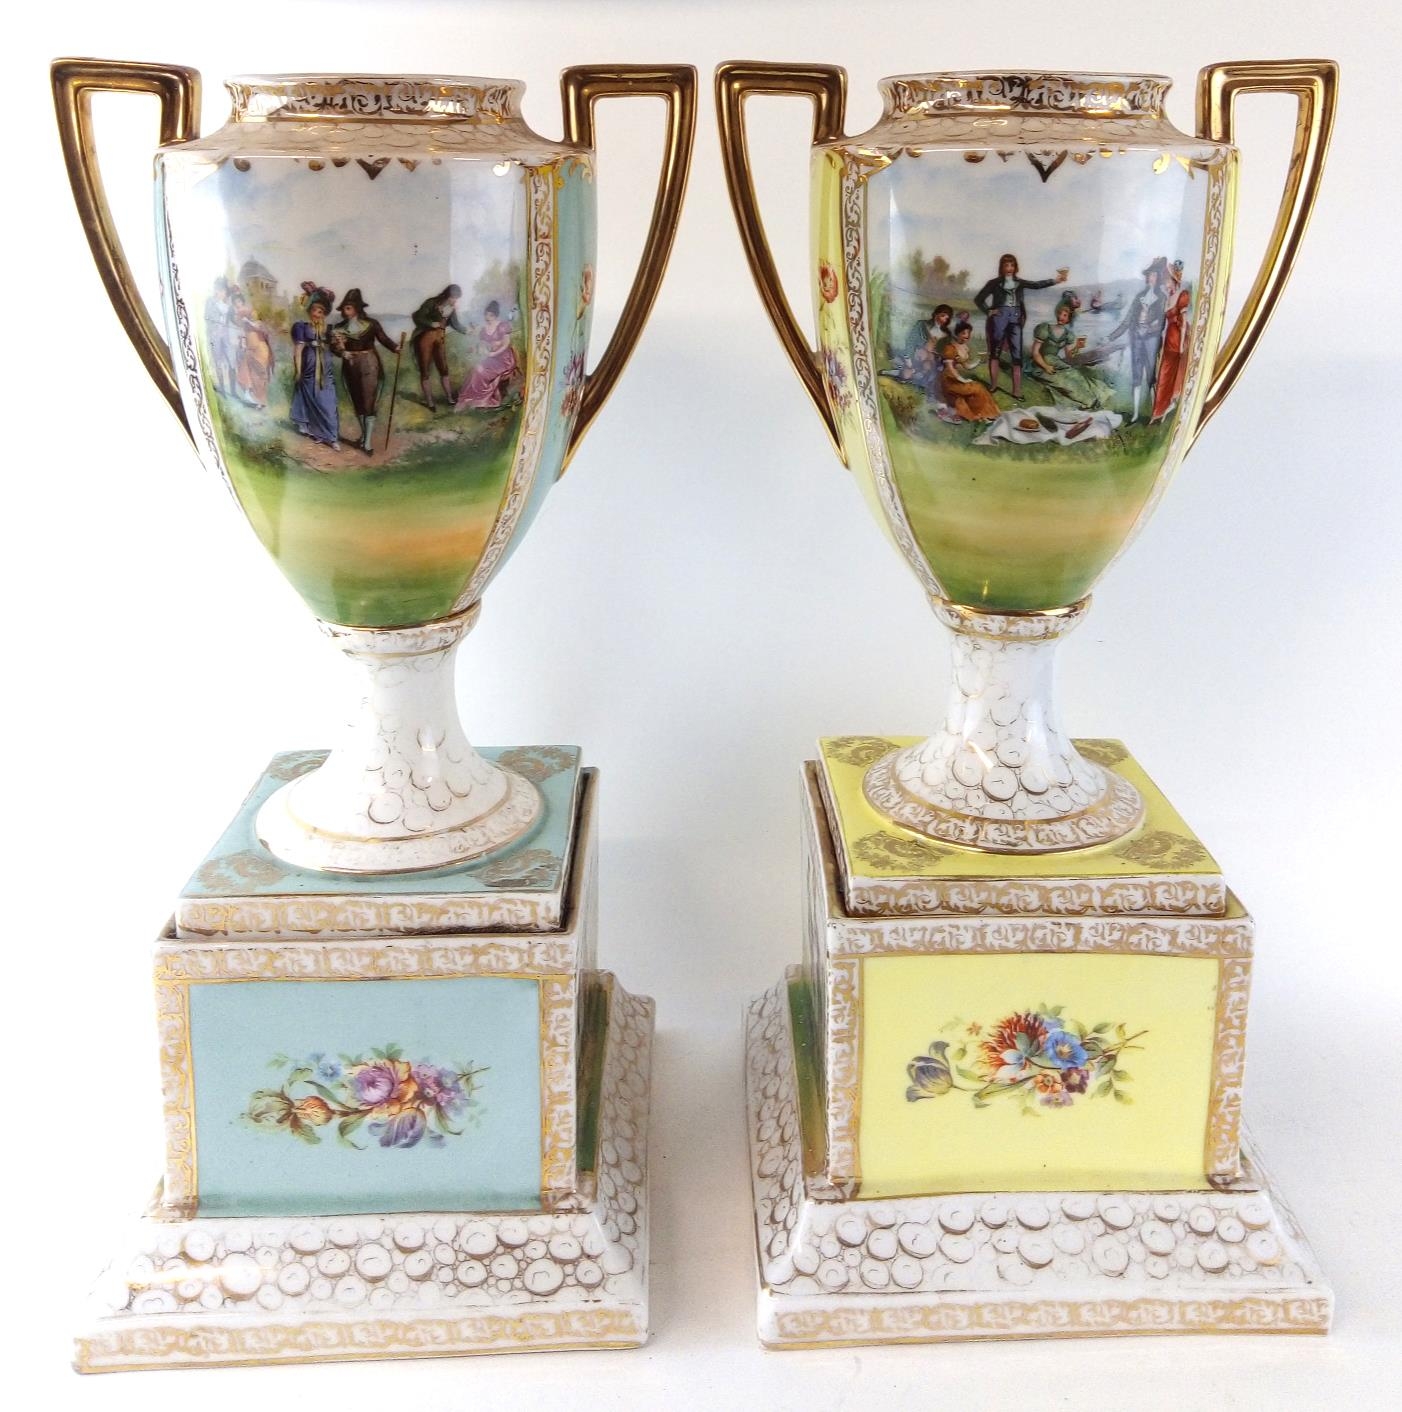 A LARGE PAIR OF EARLY 20TH CENTURY AUSTRIAN PORCELAIN PEDESTAL VASES Campagna form with twin gilt